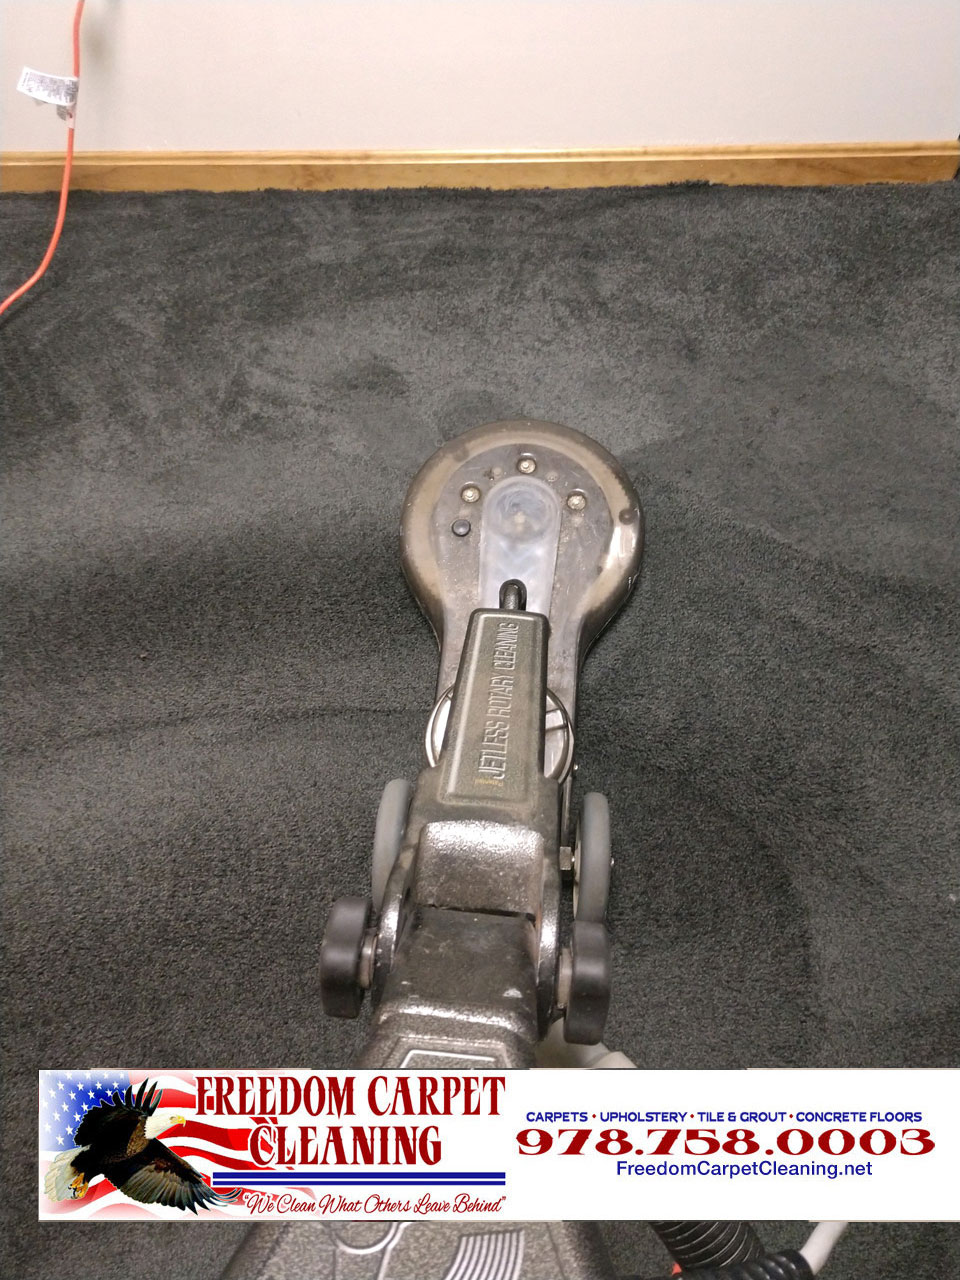 Carpet Cleaning after water damage in Andover, MA ...